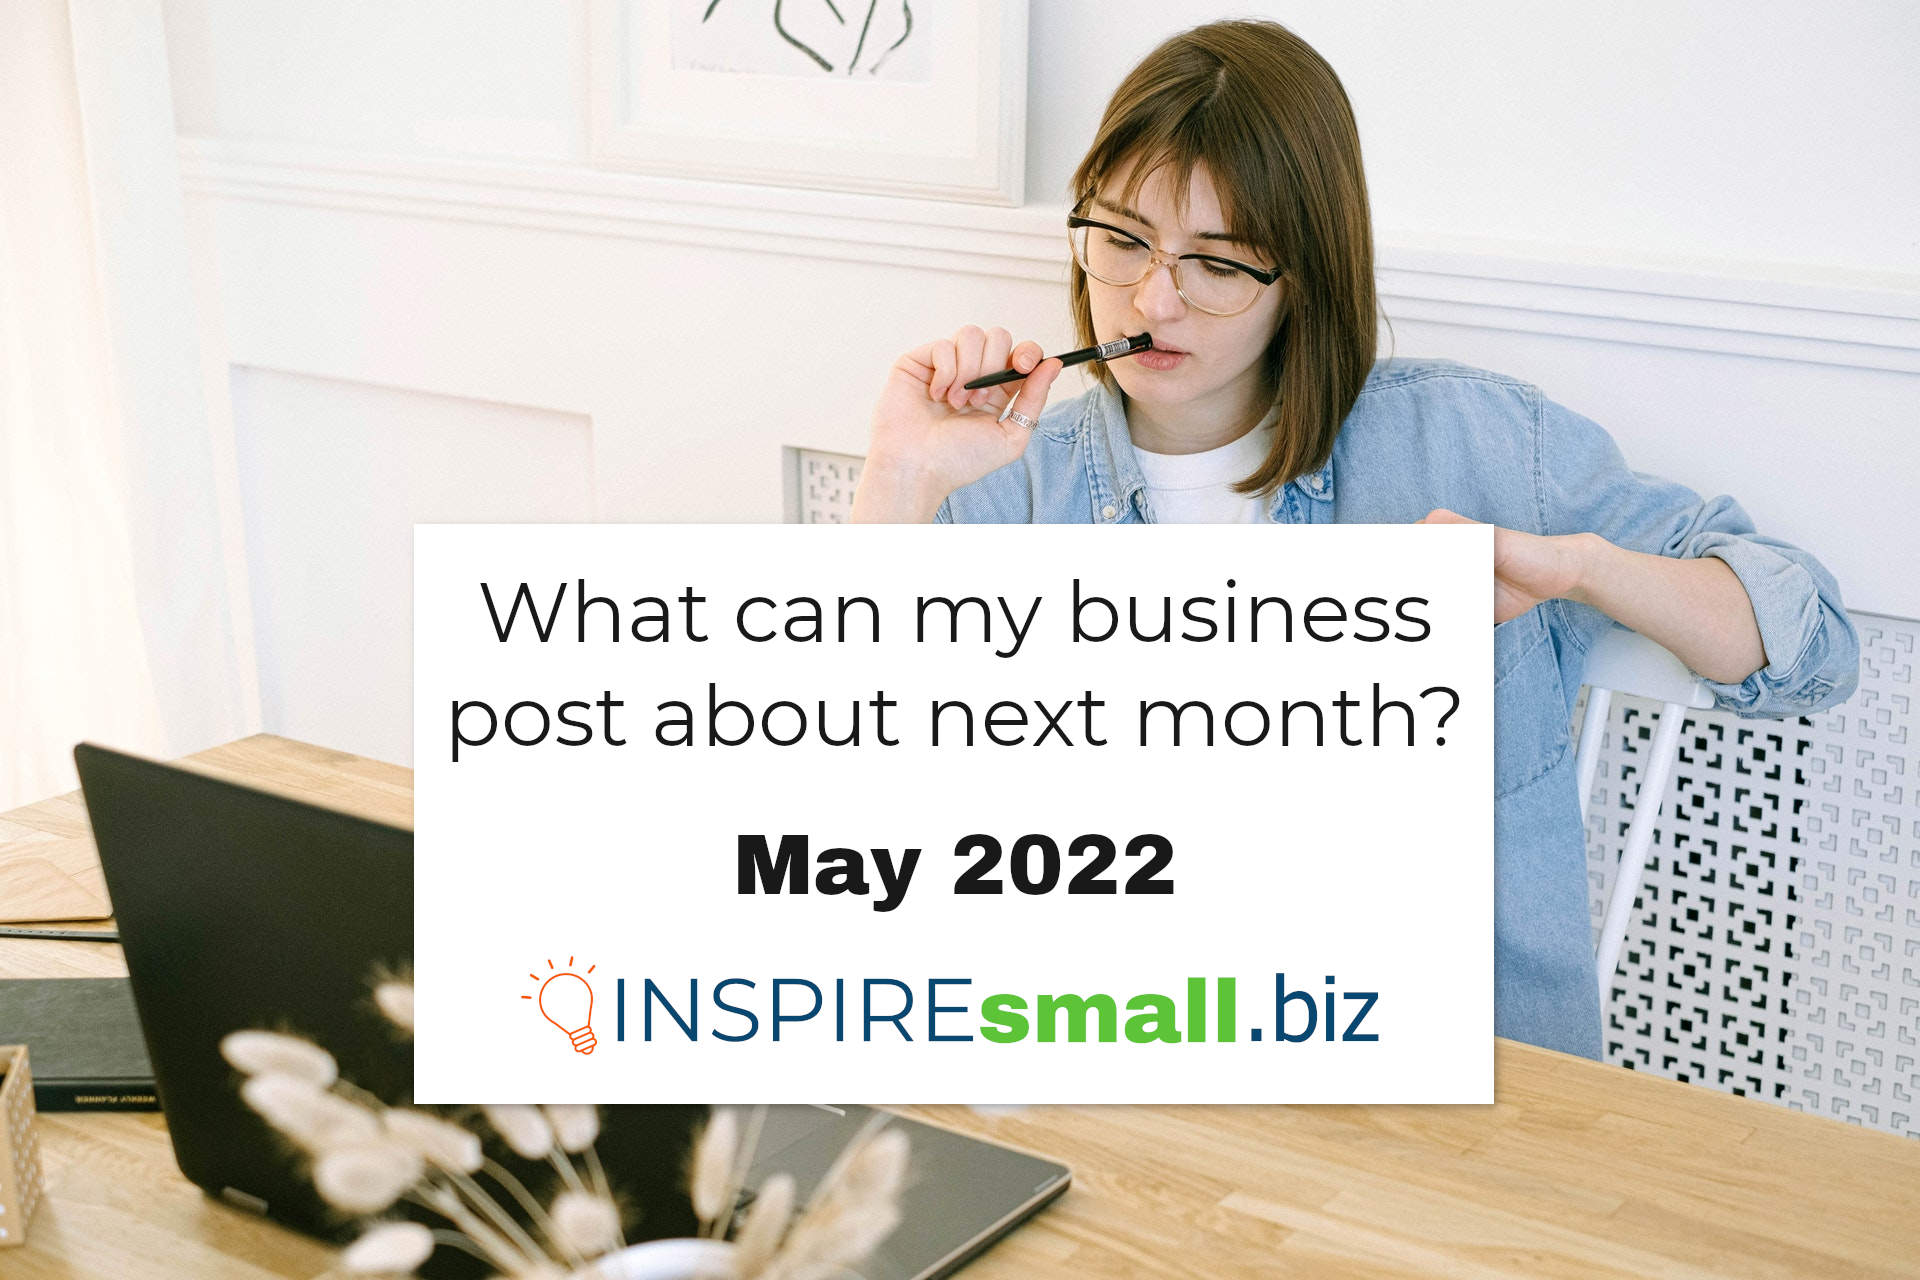 What can my business post about next month? May 2022